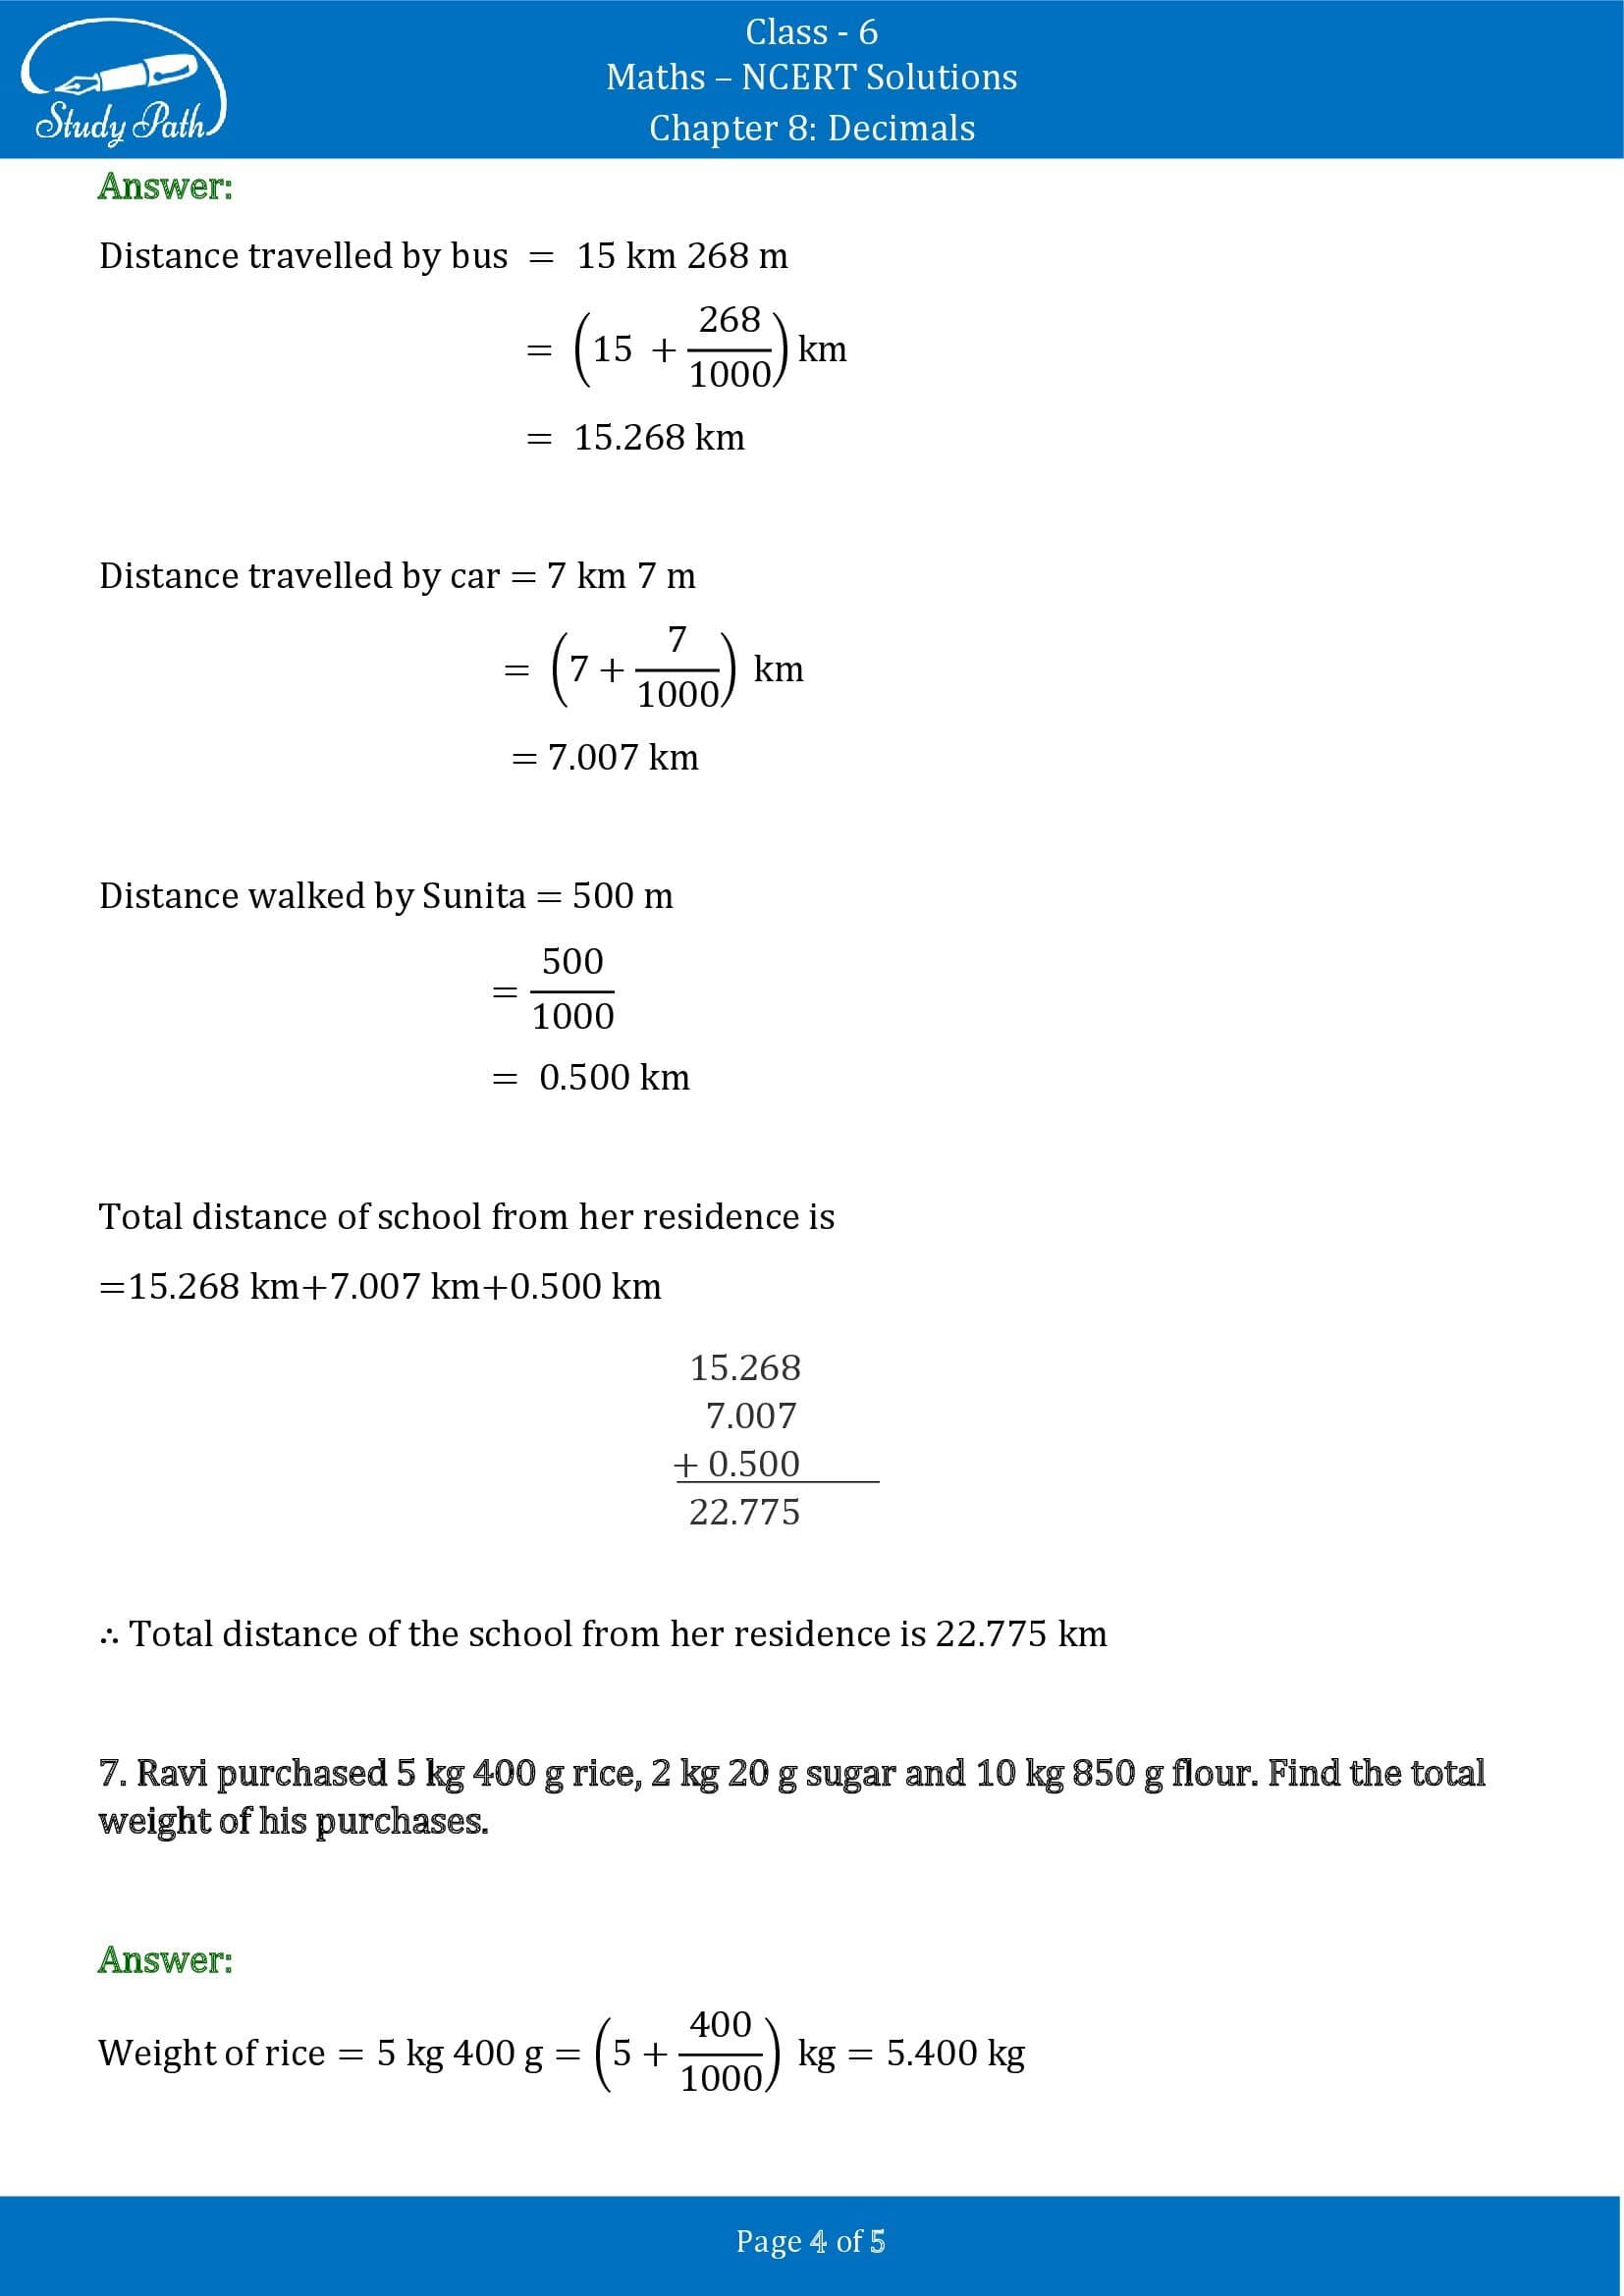 NCERT Solutions for Class 6 Maths Chapter 8 Decimals Exercise 8.5 00004